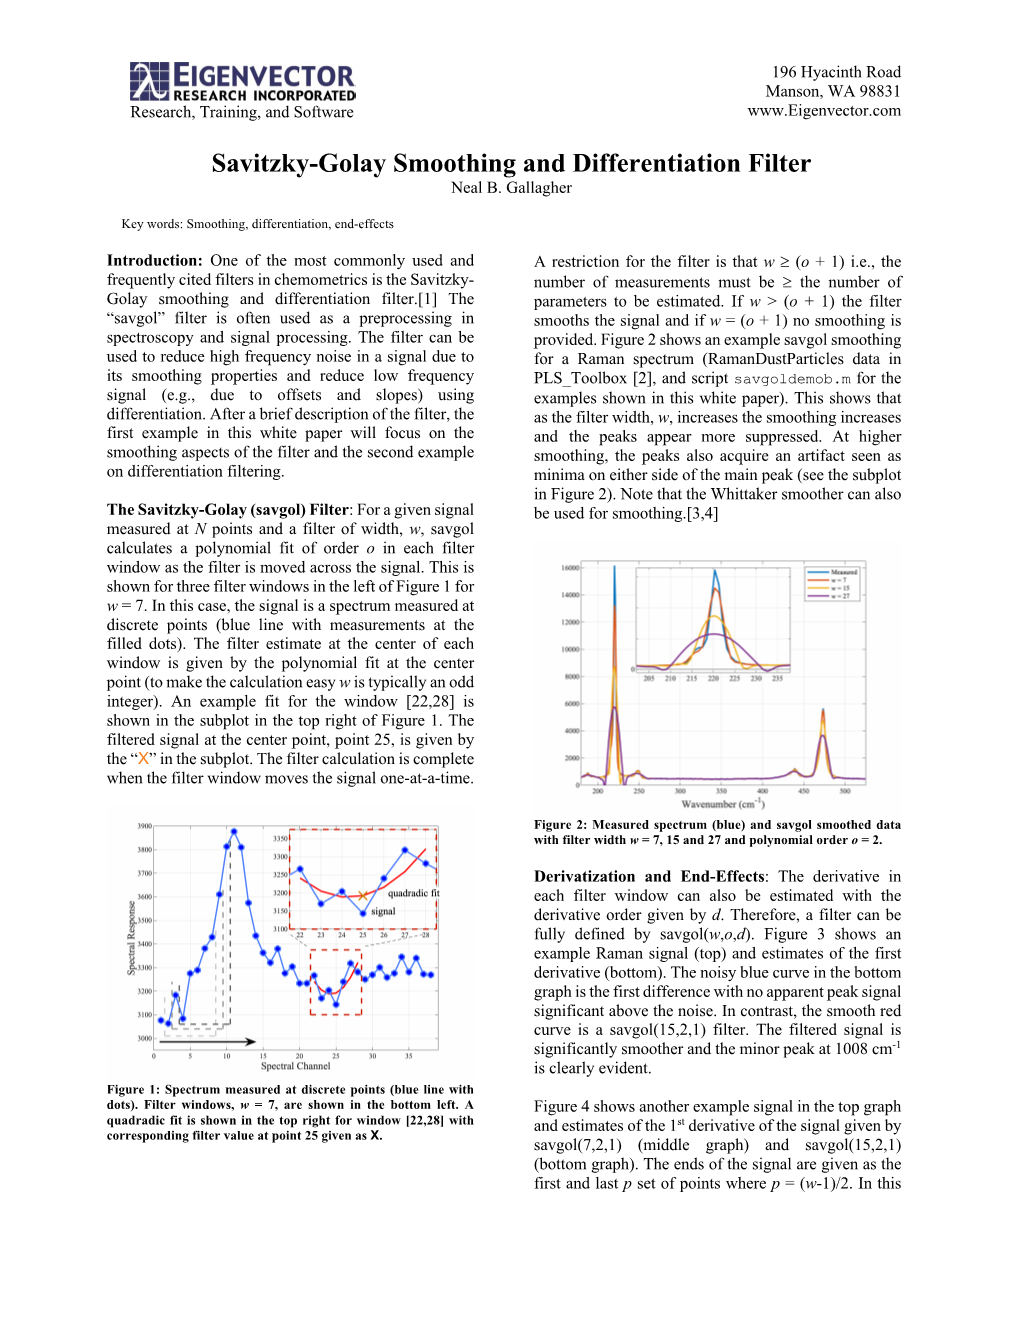 Savitzky-Golay Smoothing and Differentiation Filter Neal B